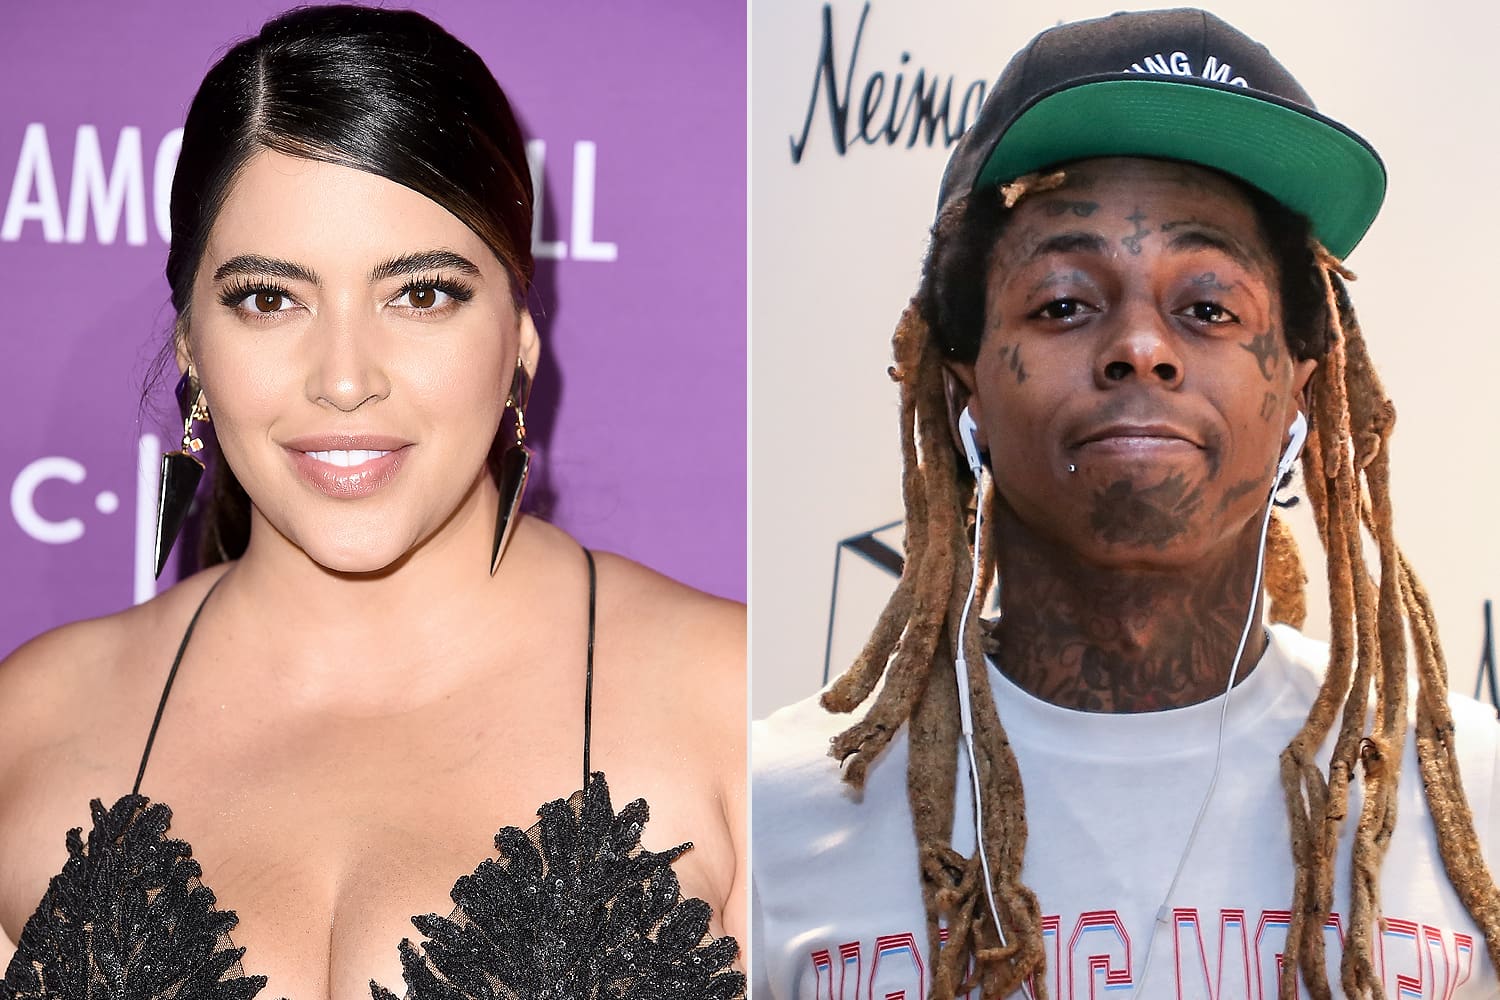 Lil Wayne And Girlfriend Denise Bidot Could Be Over Following His Endorsement For Donald Trump